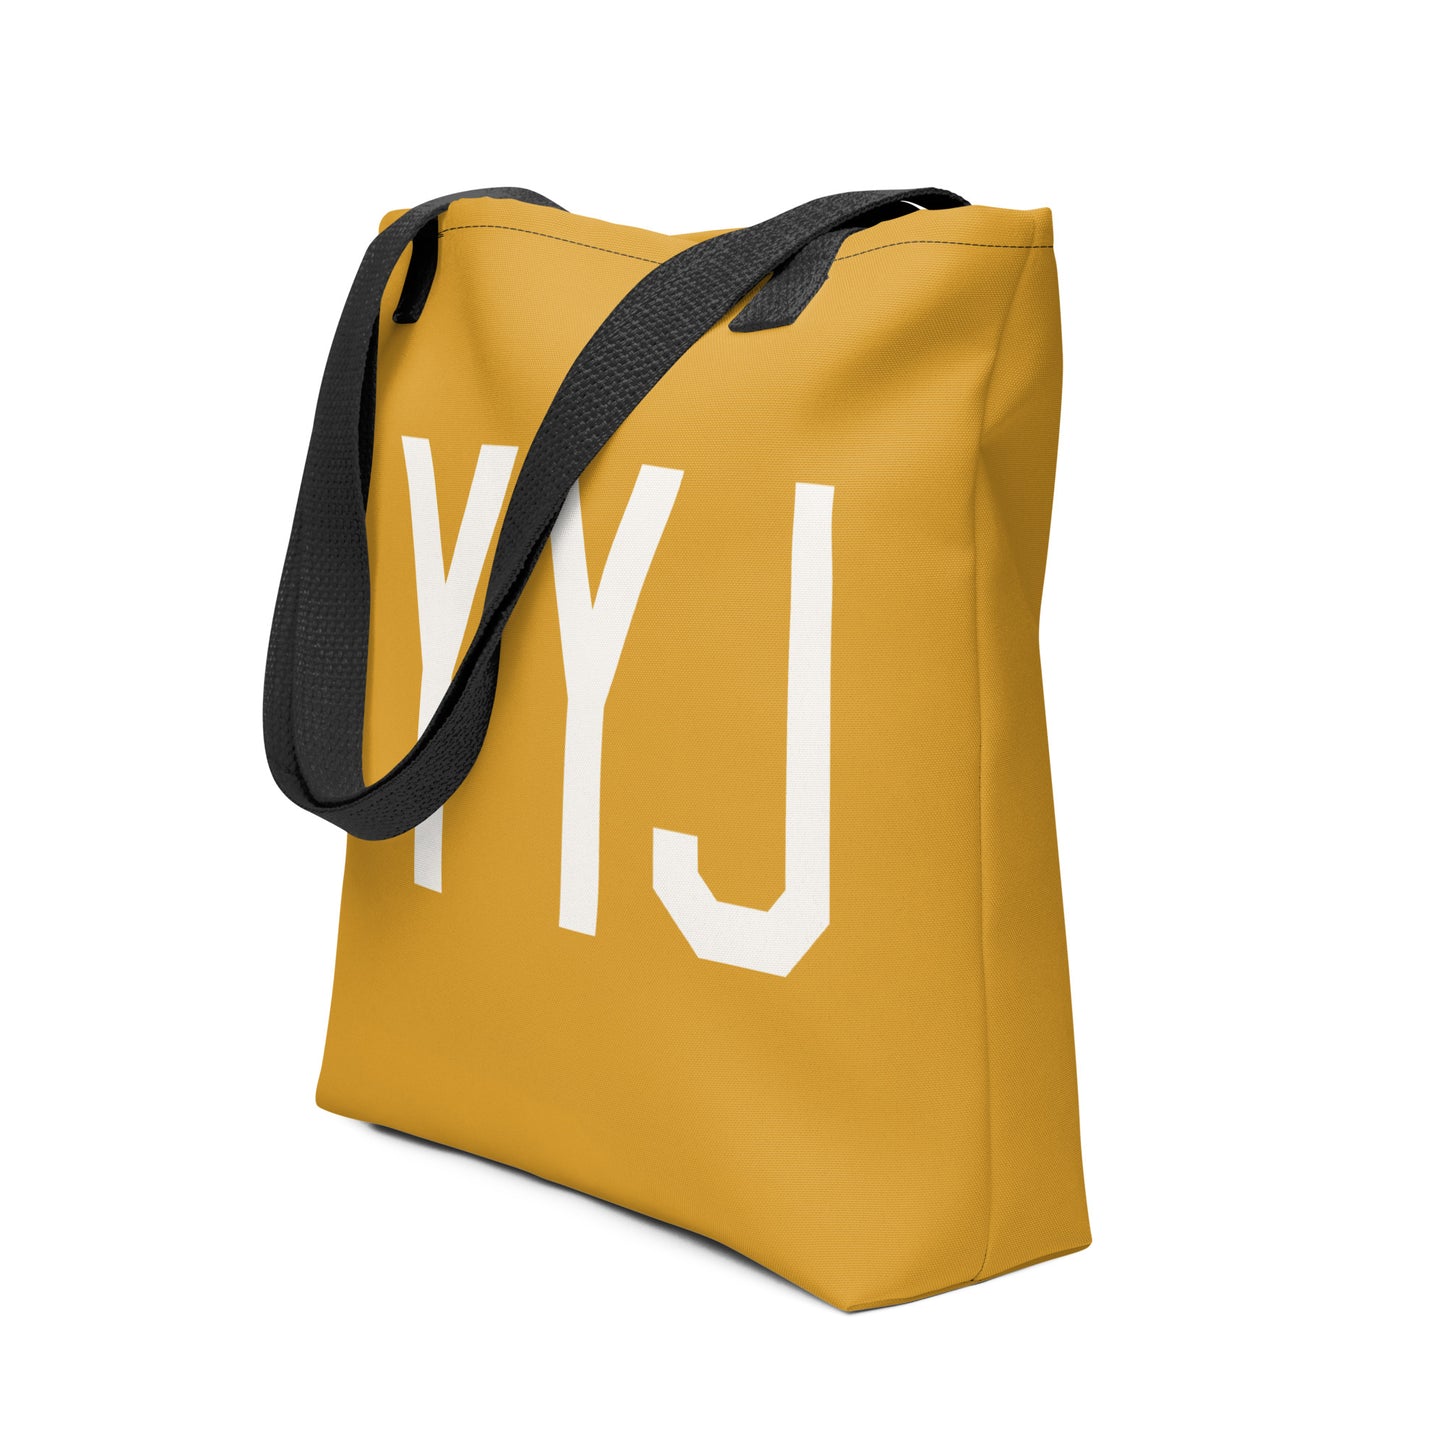 Aviation Gift Tote Bag - Buttercup • YYJ Victoria • YHM Designs - Image 05